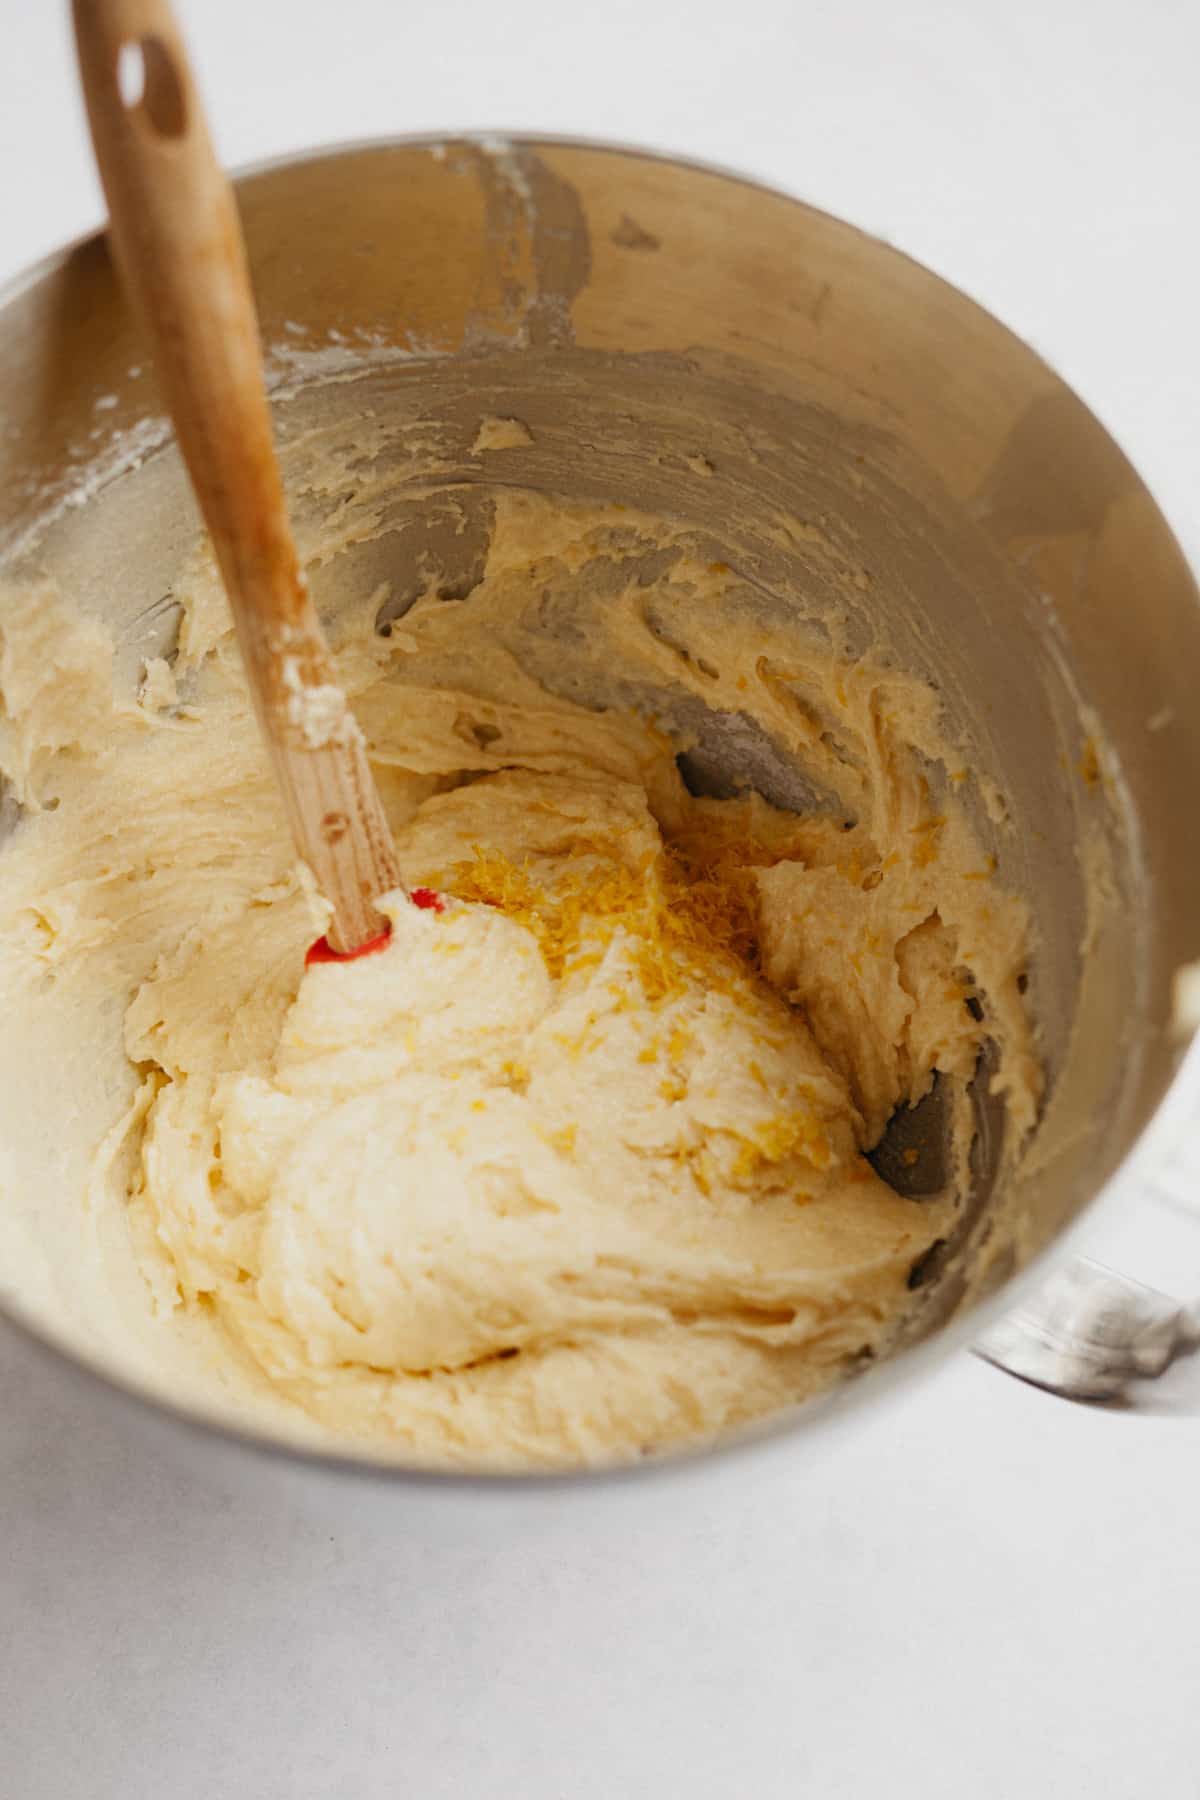 A large mixing bowl with cake batter and a spatua with a wooden handle